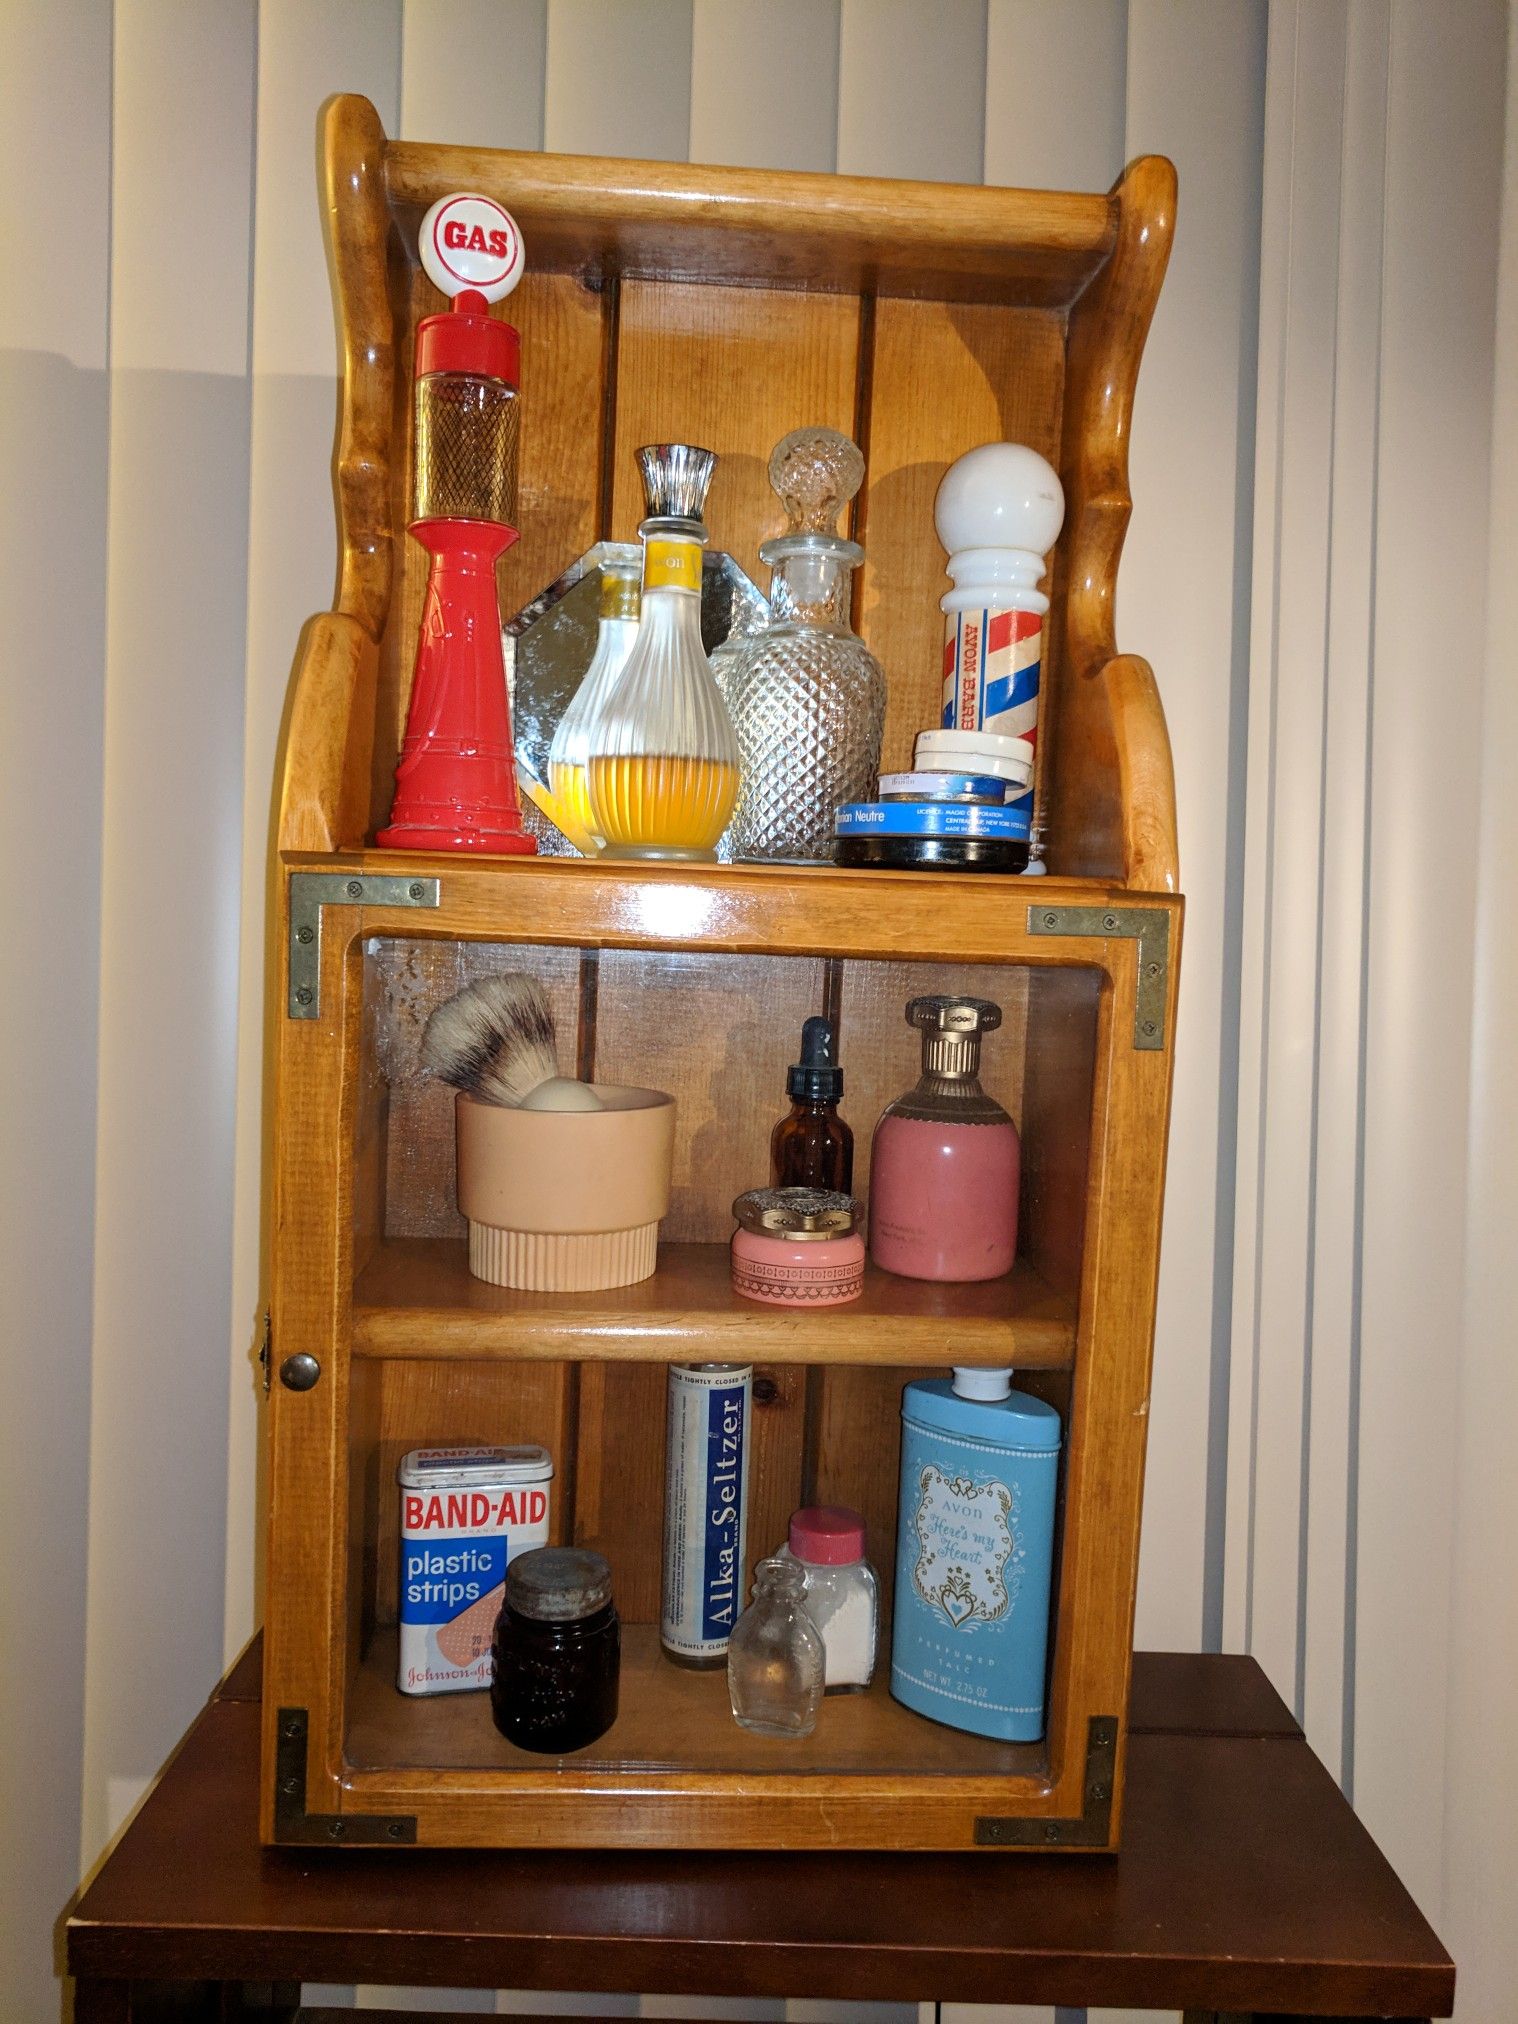 Old fashioned medicine cabinet with collectible vintage Avon and other brand name antique bottles.